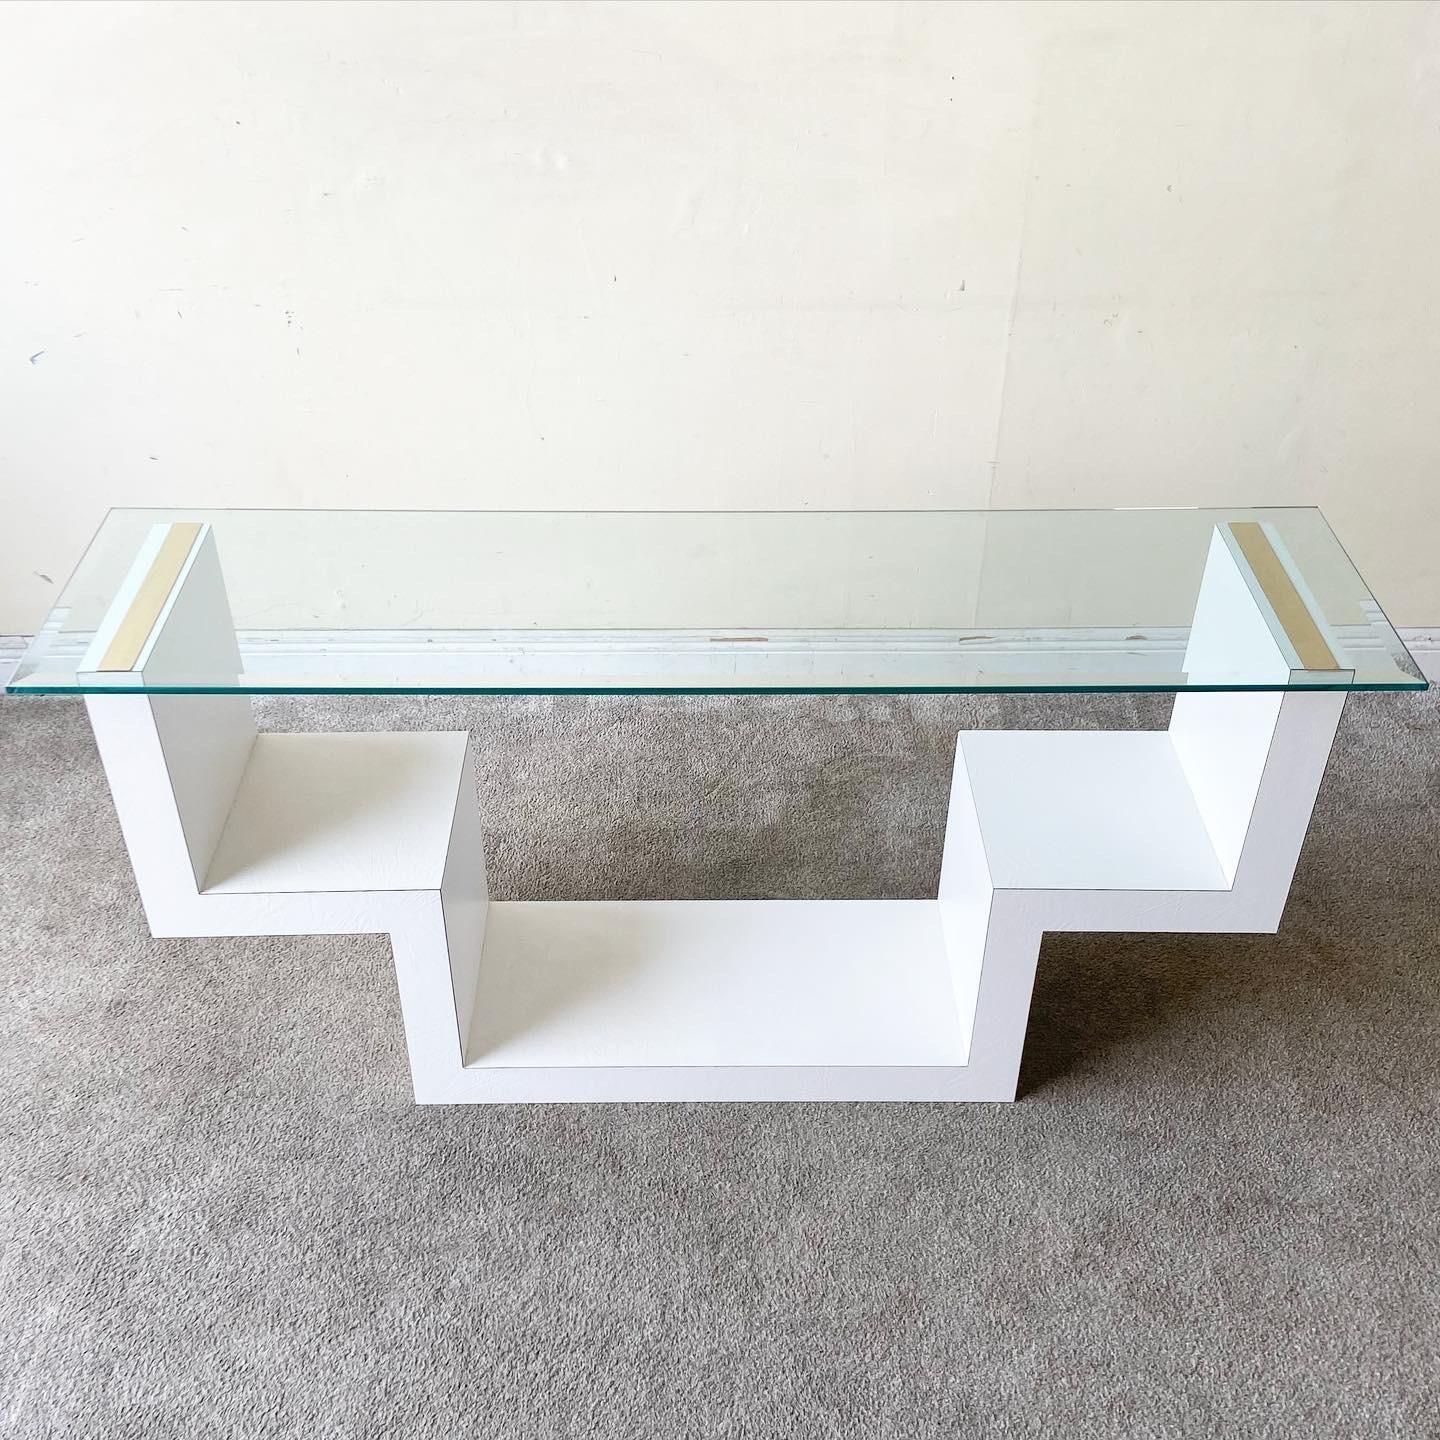 Amazing postmodern beveled glass top console table. Tables features a white faux leather laminate with gold strips on the top of the table base.